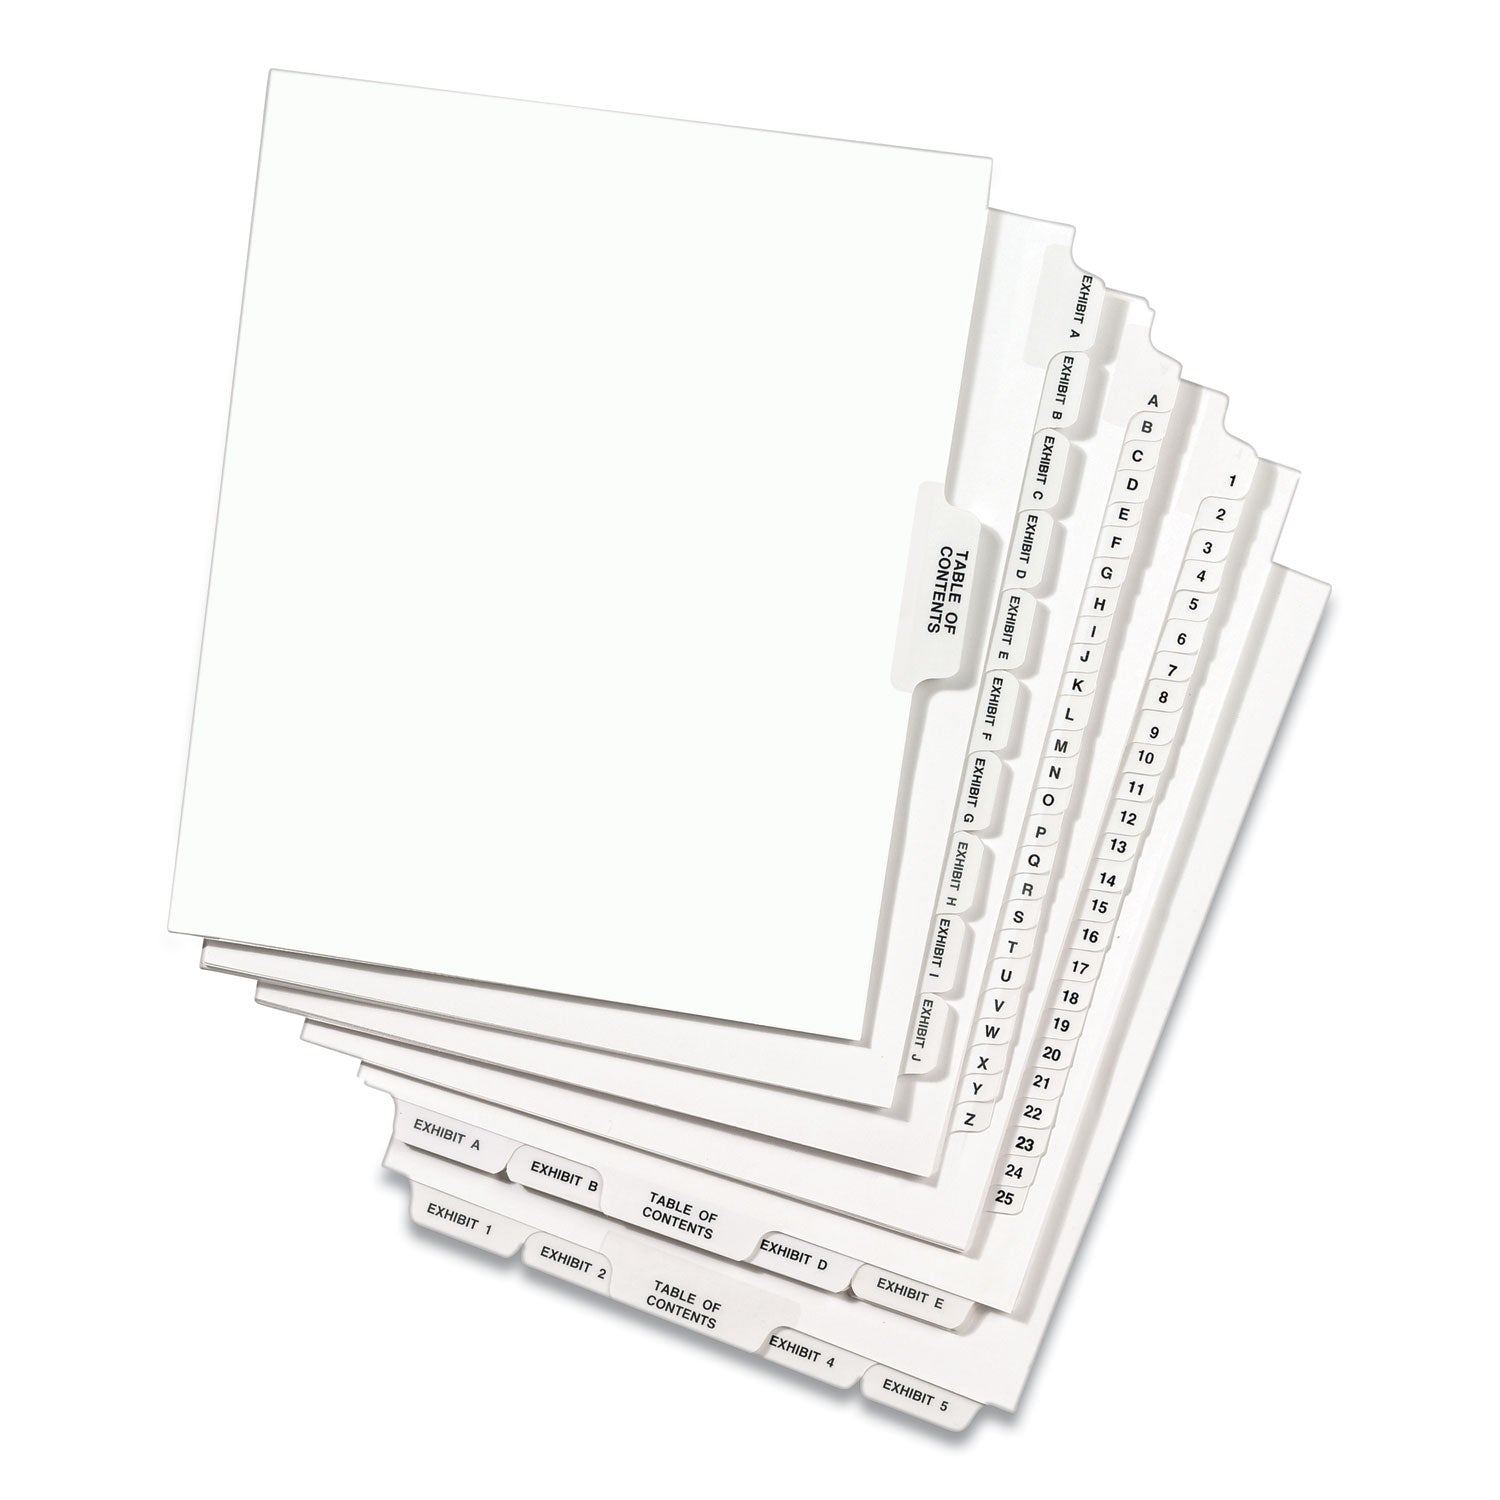 Preprinted Legal Exhibit Side Tab Index Dividers, Avery Style, 27-Tab, A to Z, 11 x 8.5, White, 1 Set - 